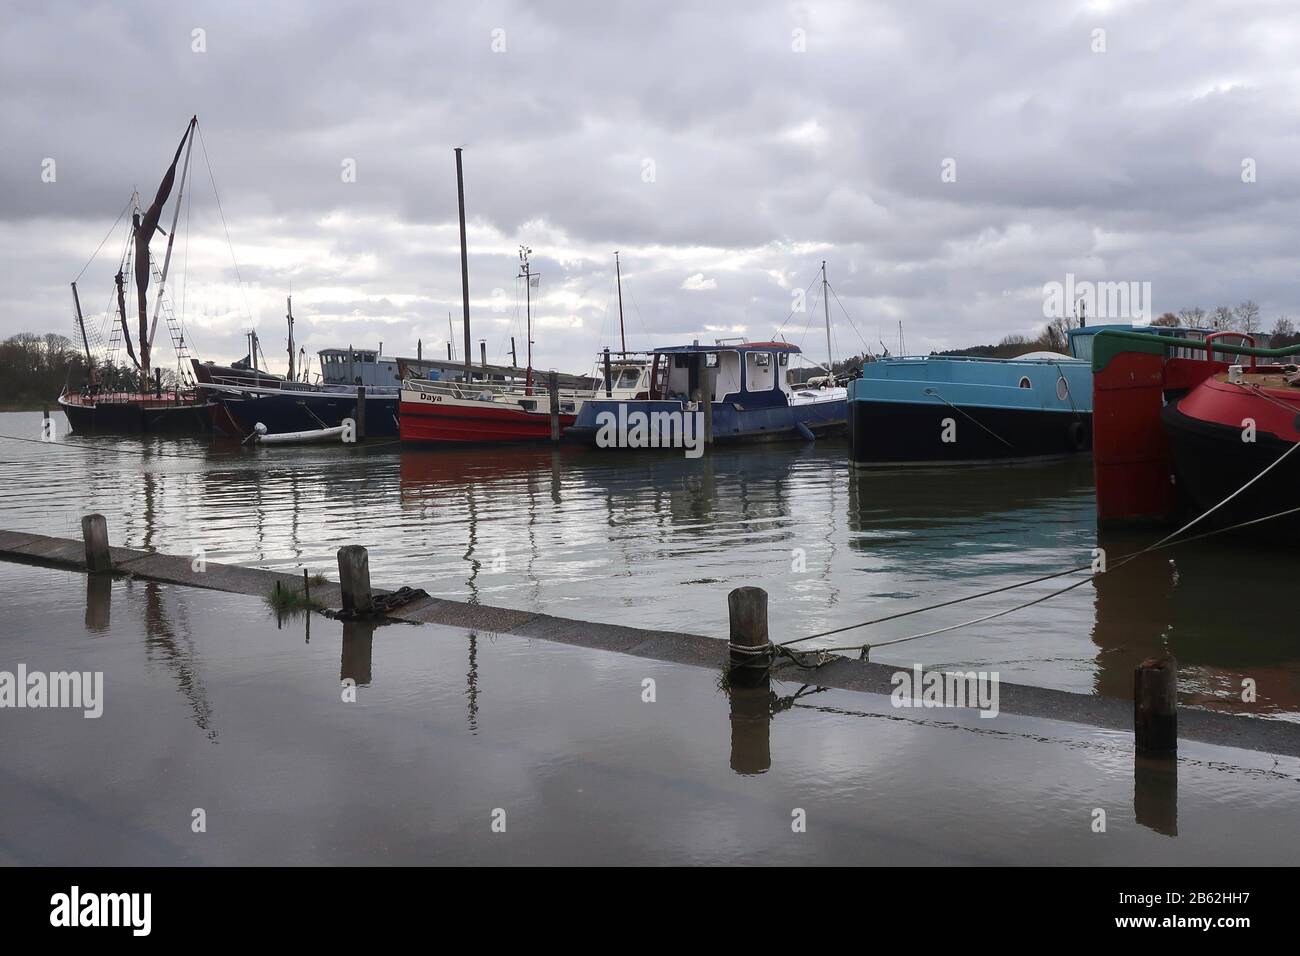 Woodbridge, Suffolk, UK - 9 March 2020: High tide. Wet and windy afternoon walk alongside the River Deben from Woodbridge to Melton. Stock Photo